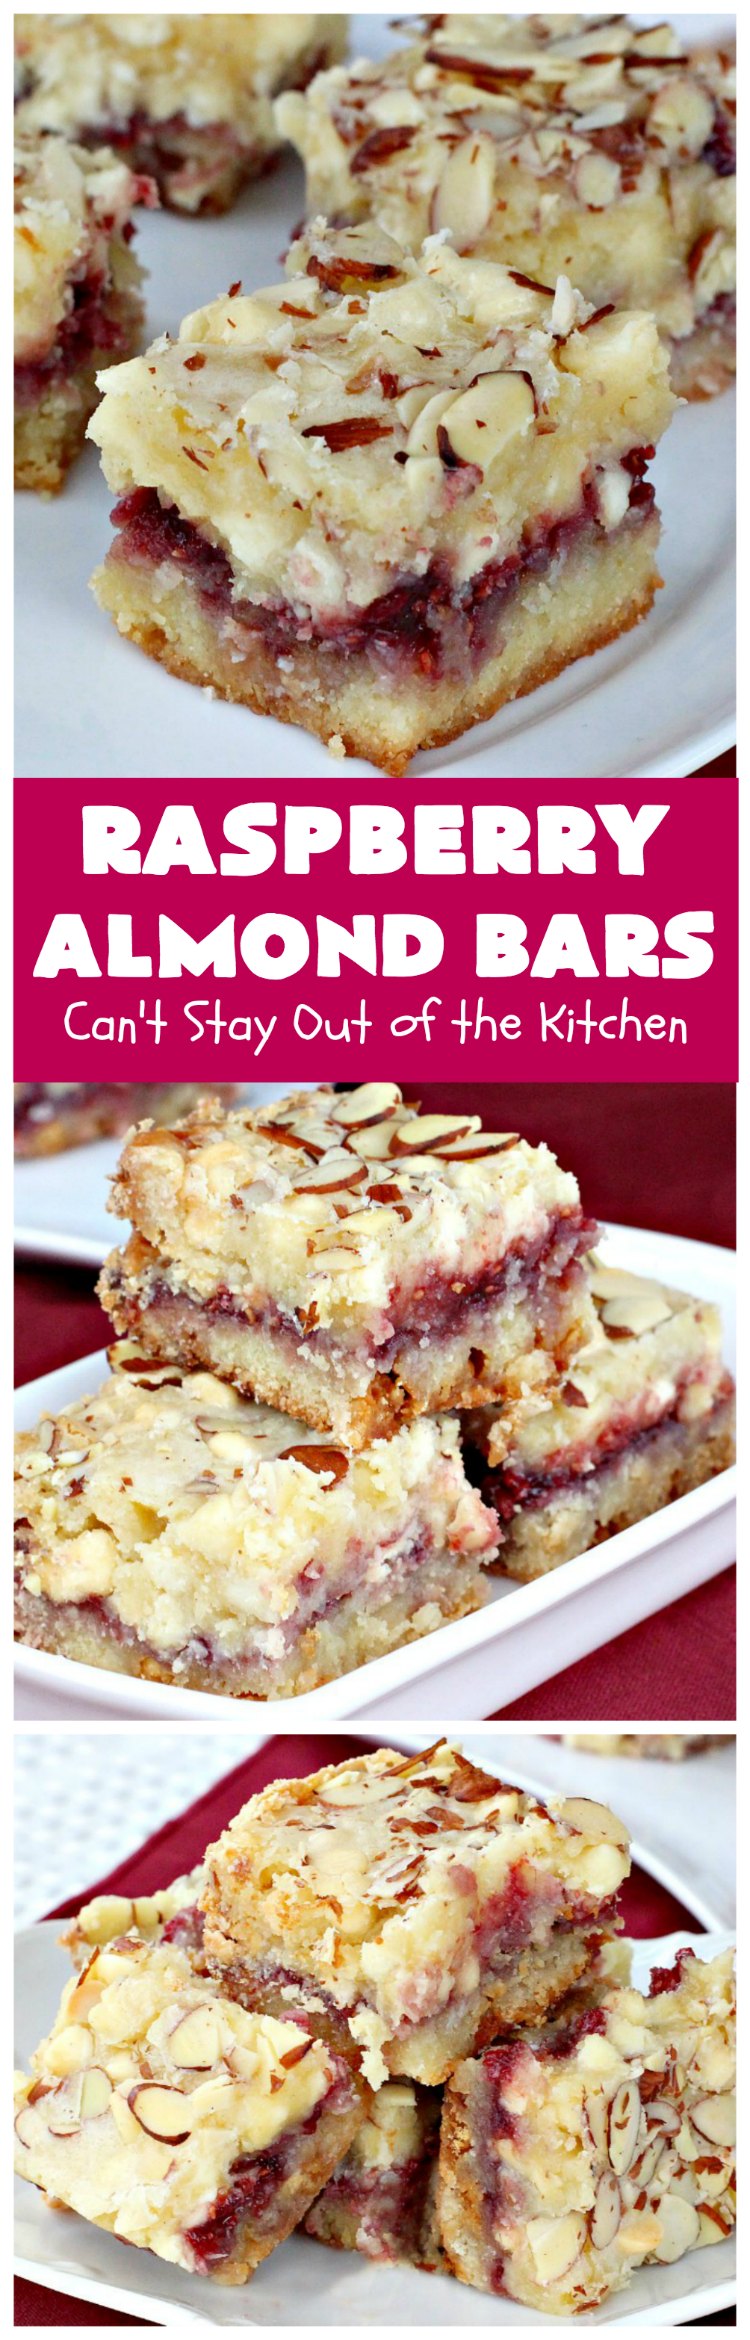 Raspberry Almond Bars | Can't Stay Out of the Kitchen